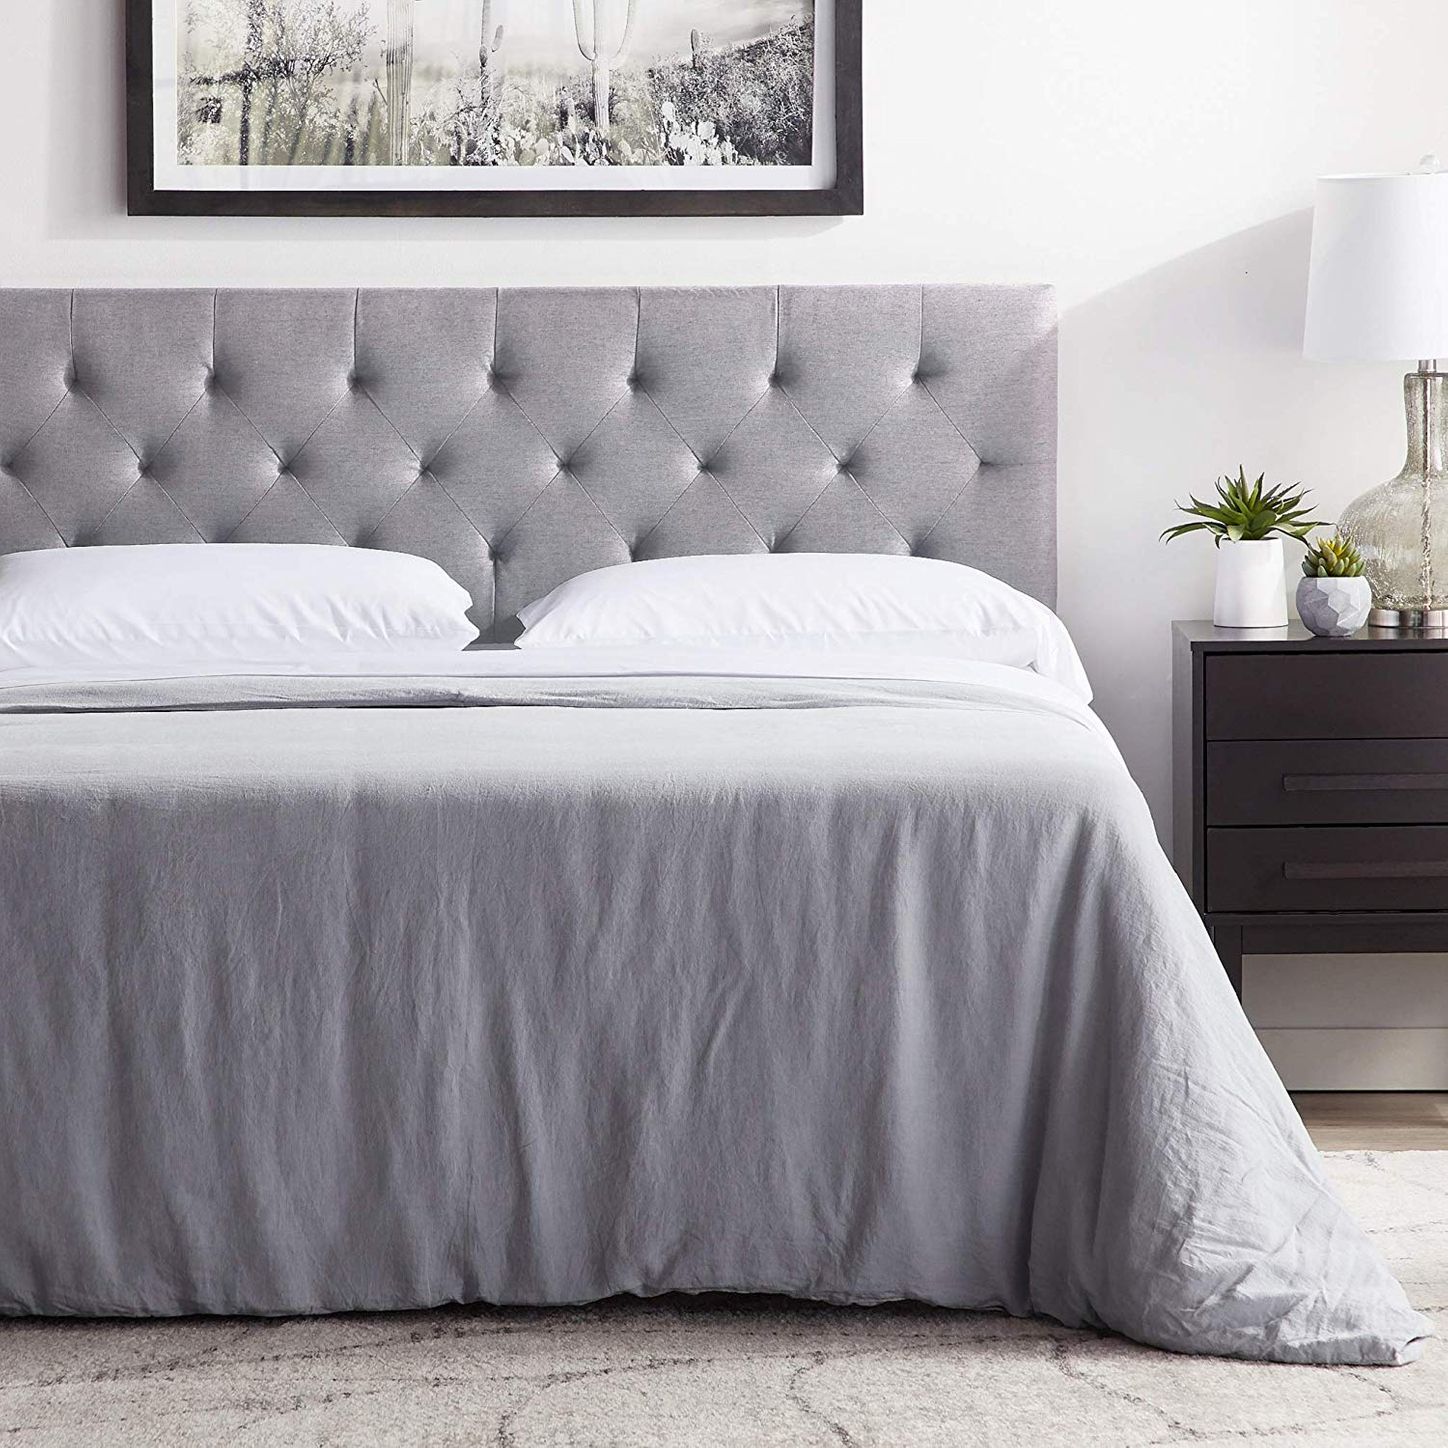 12 Best Headboards 2019 The Strategist, Are Upholstered Headboards Hard To Keep Clean